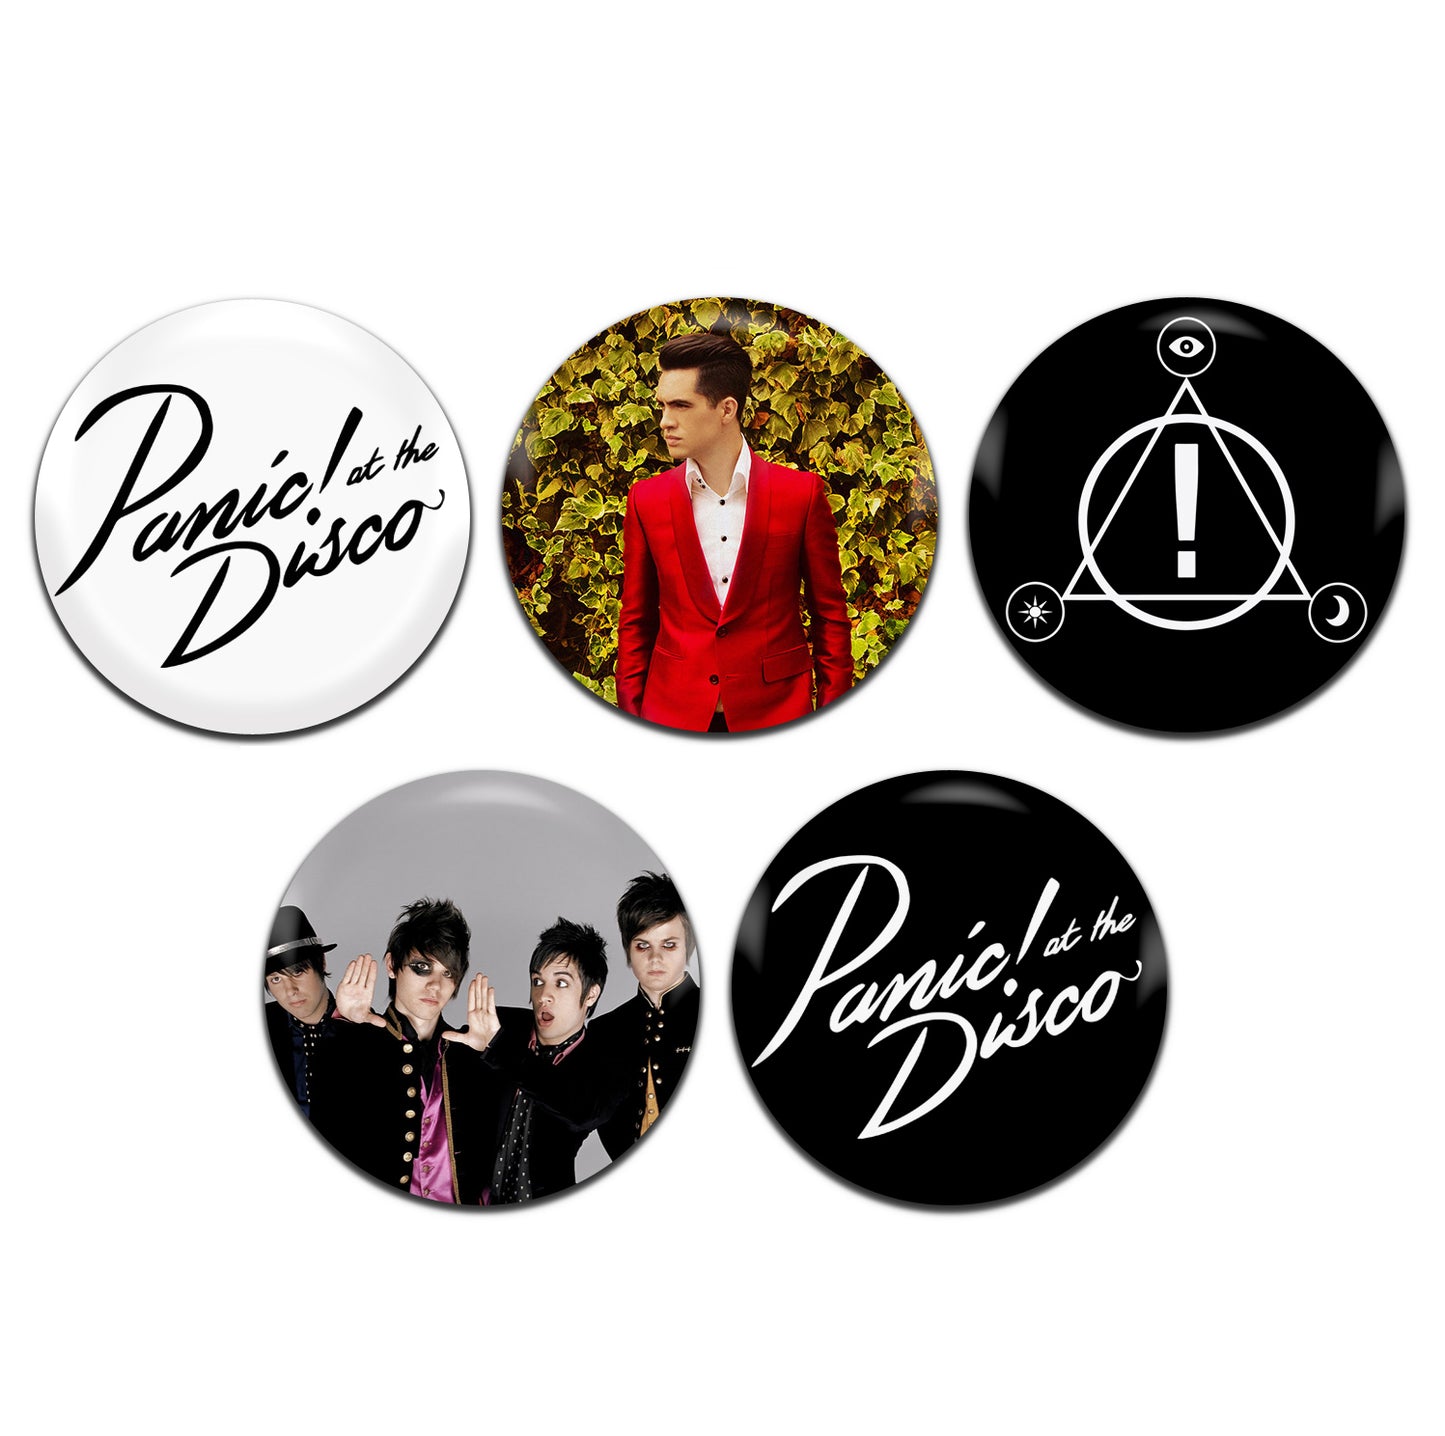 Panic! At The Disco Pop Rock Alternative Emo 00's 25mm / 1 Inch D-Pin Button Badges (5x Set)